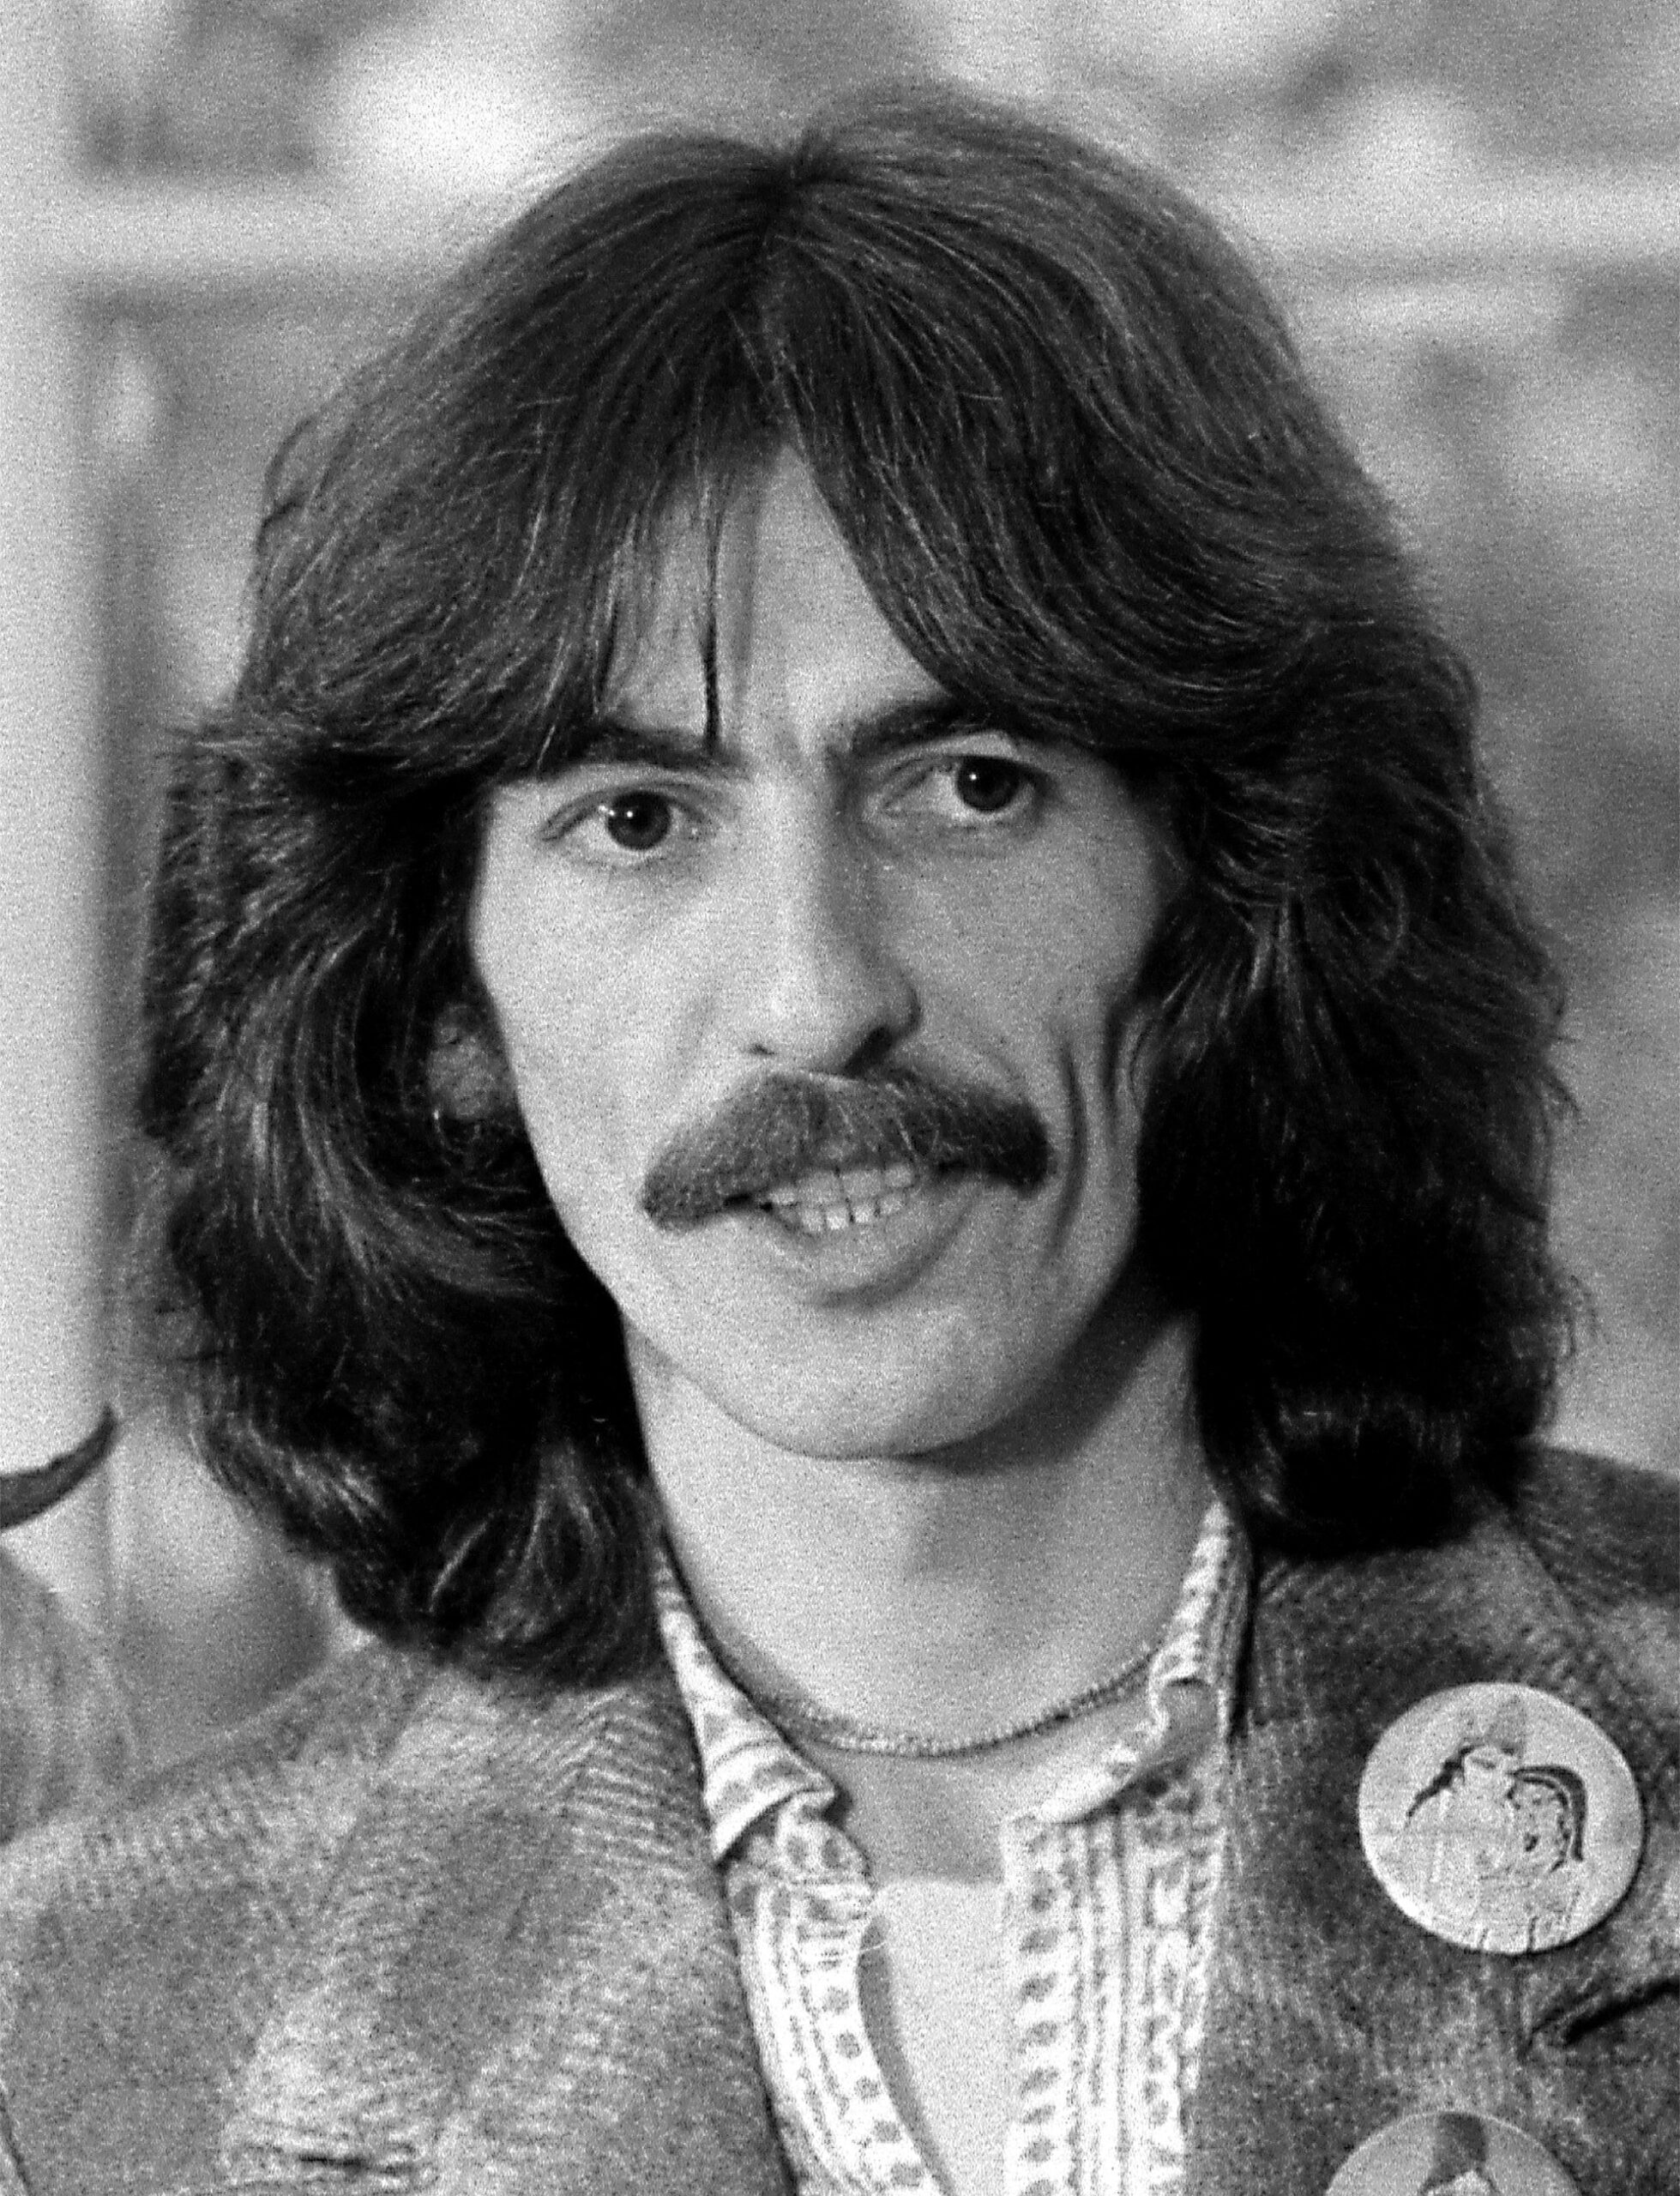 Introduction to George Harrison